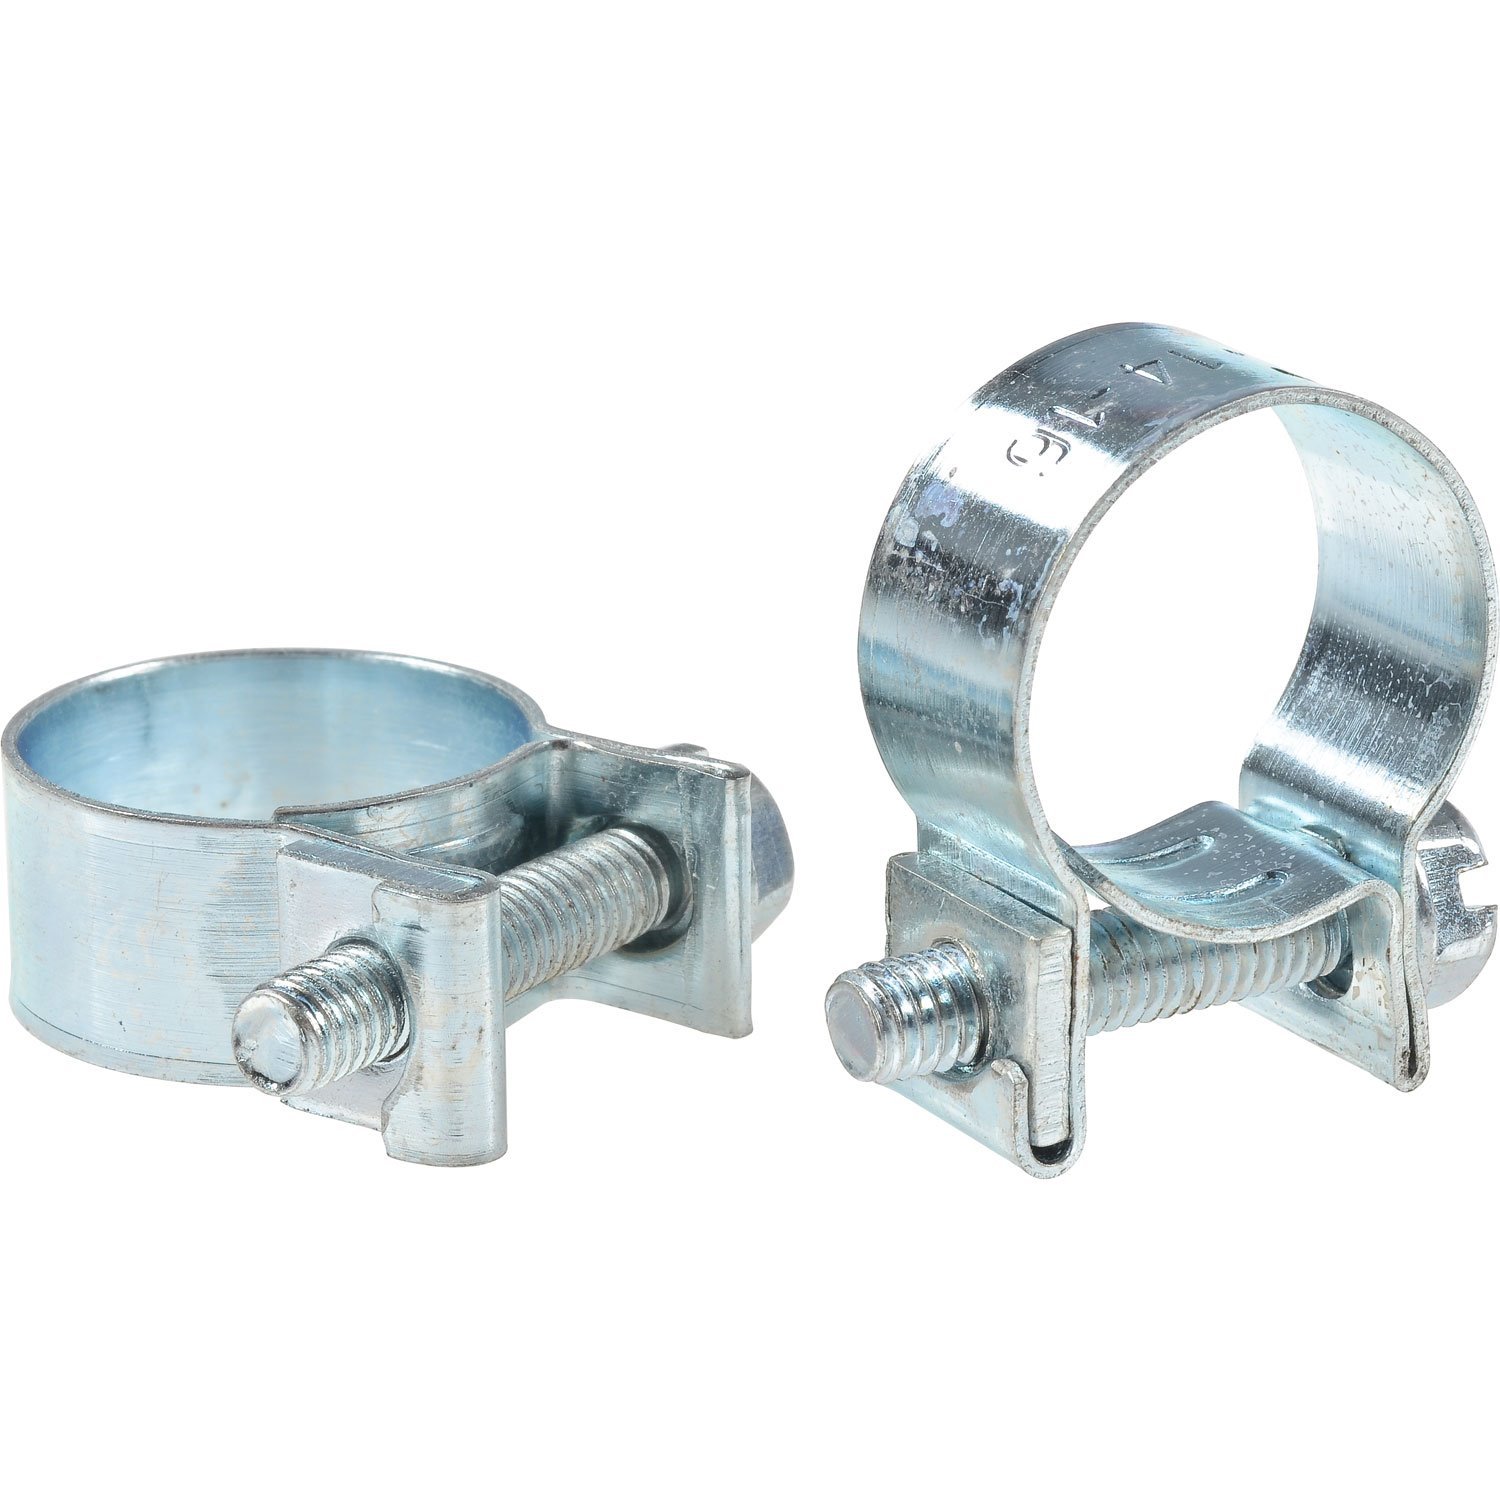 Fuel Injection Hose Clamps Fits 3/8